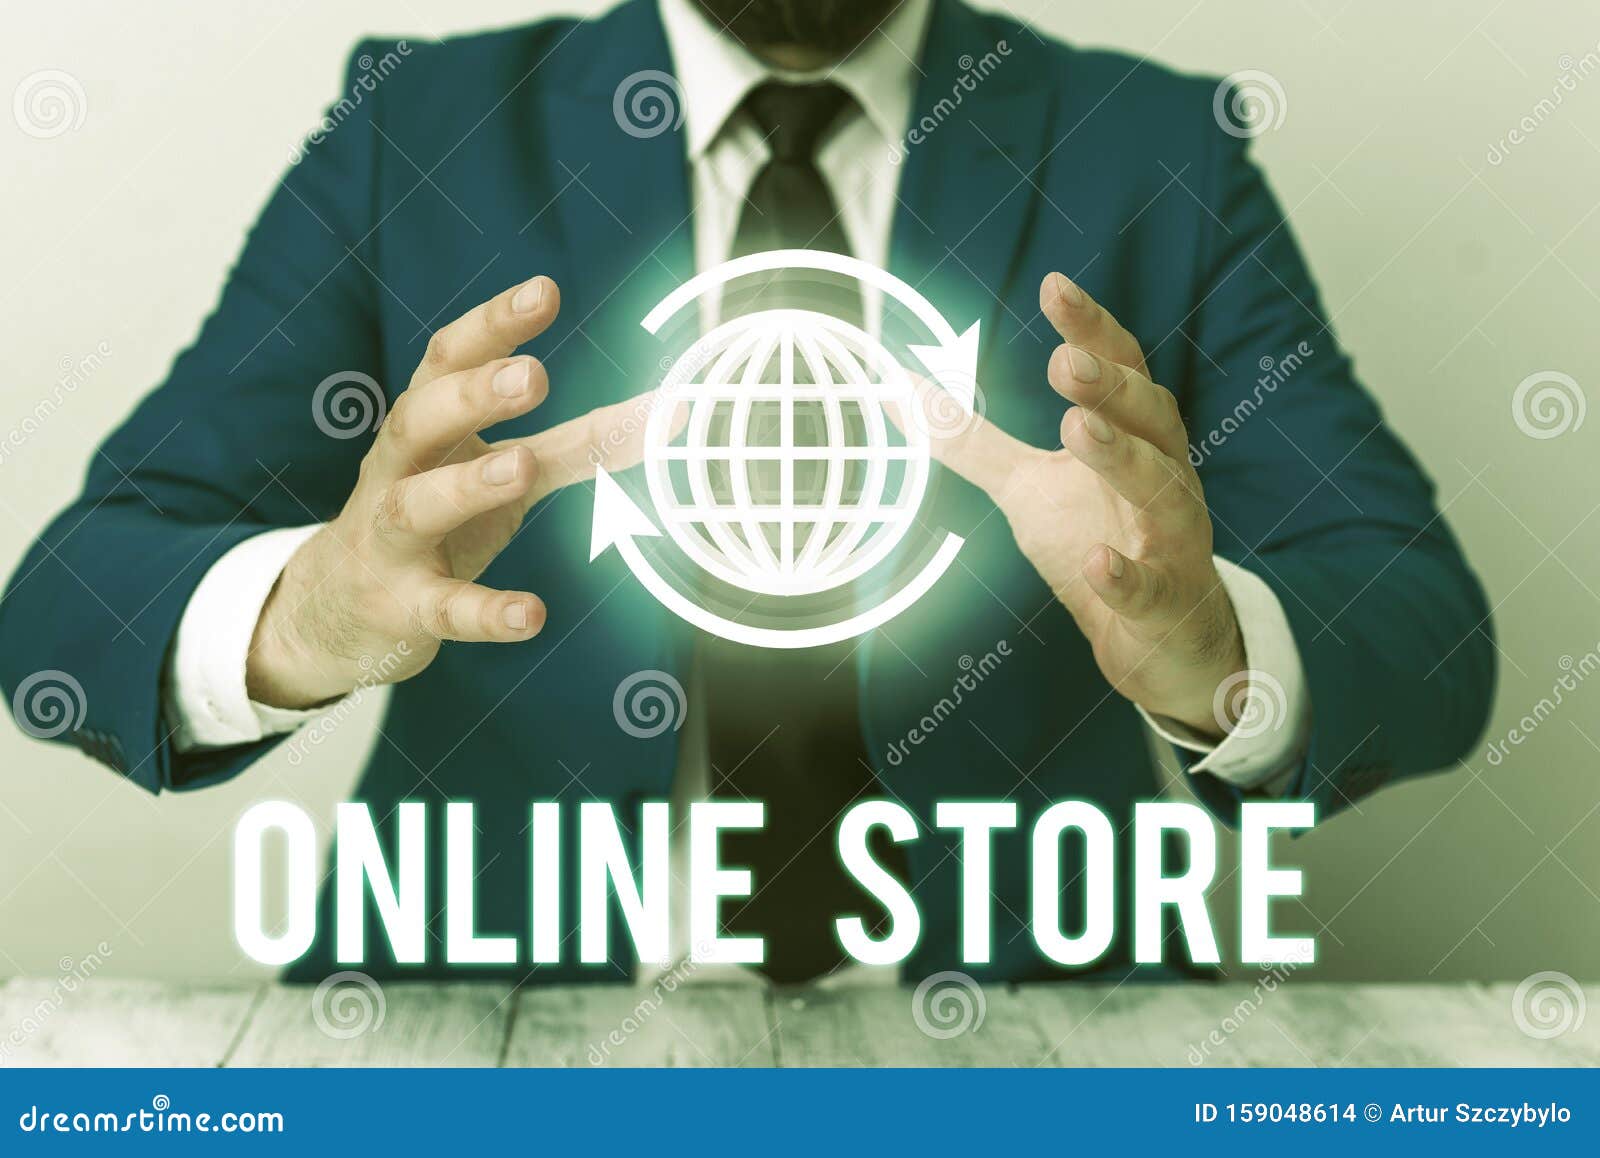 Handwriting Text Online Store Concept Meaning A Website That Offers Items For Sale And Accept Credit Cards Stock Photo Image Of Gadget Credit 159048614